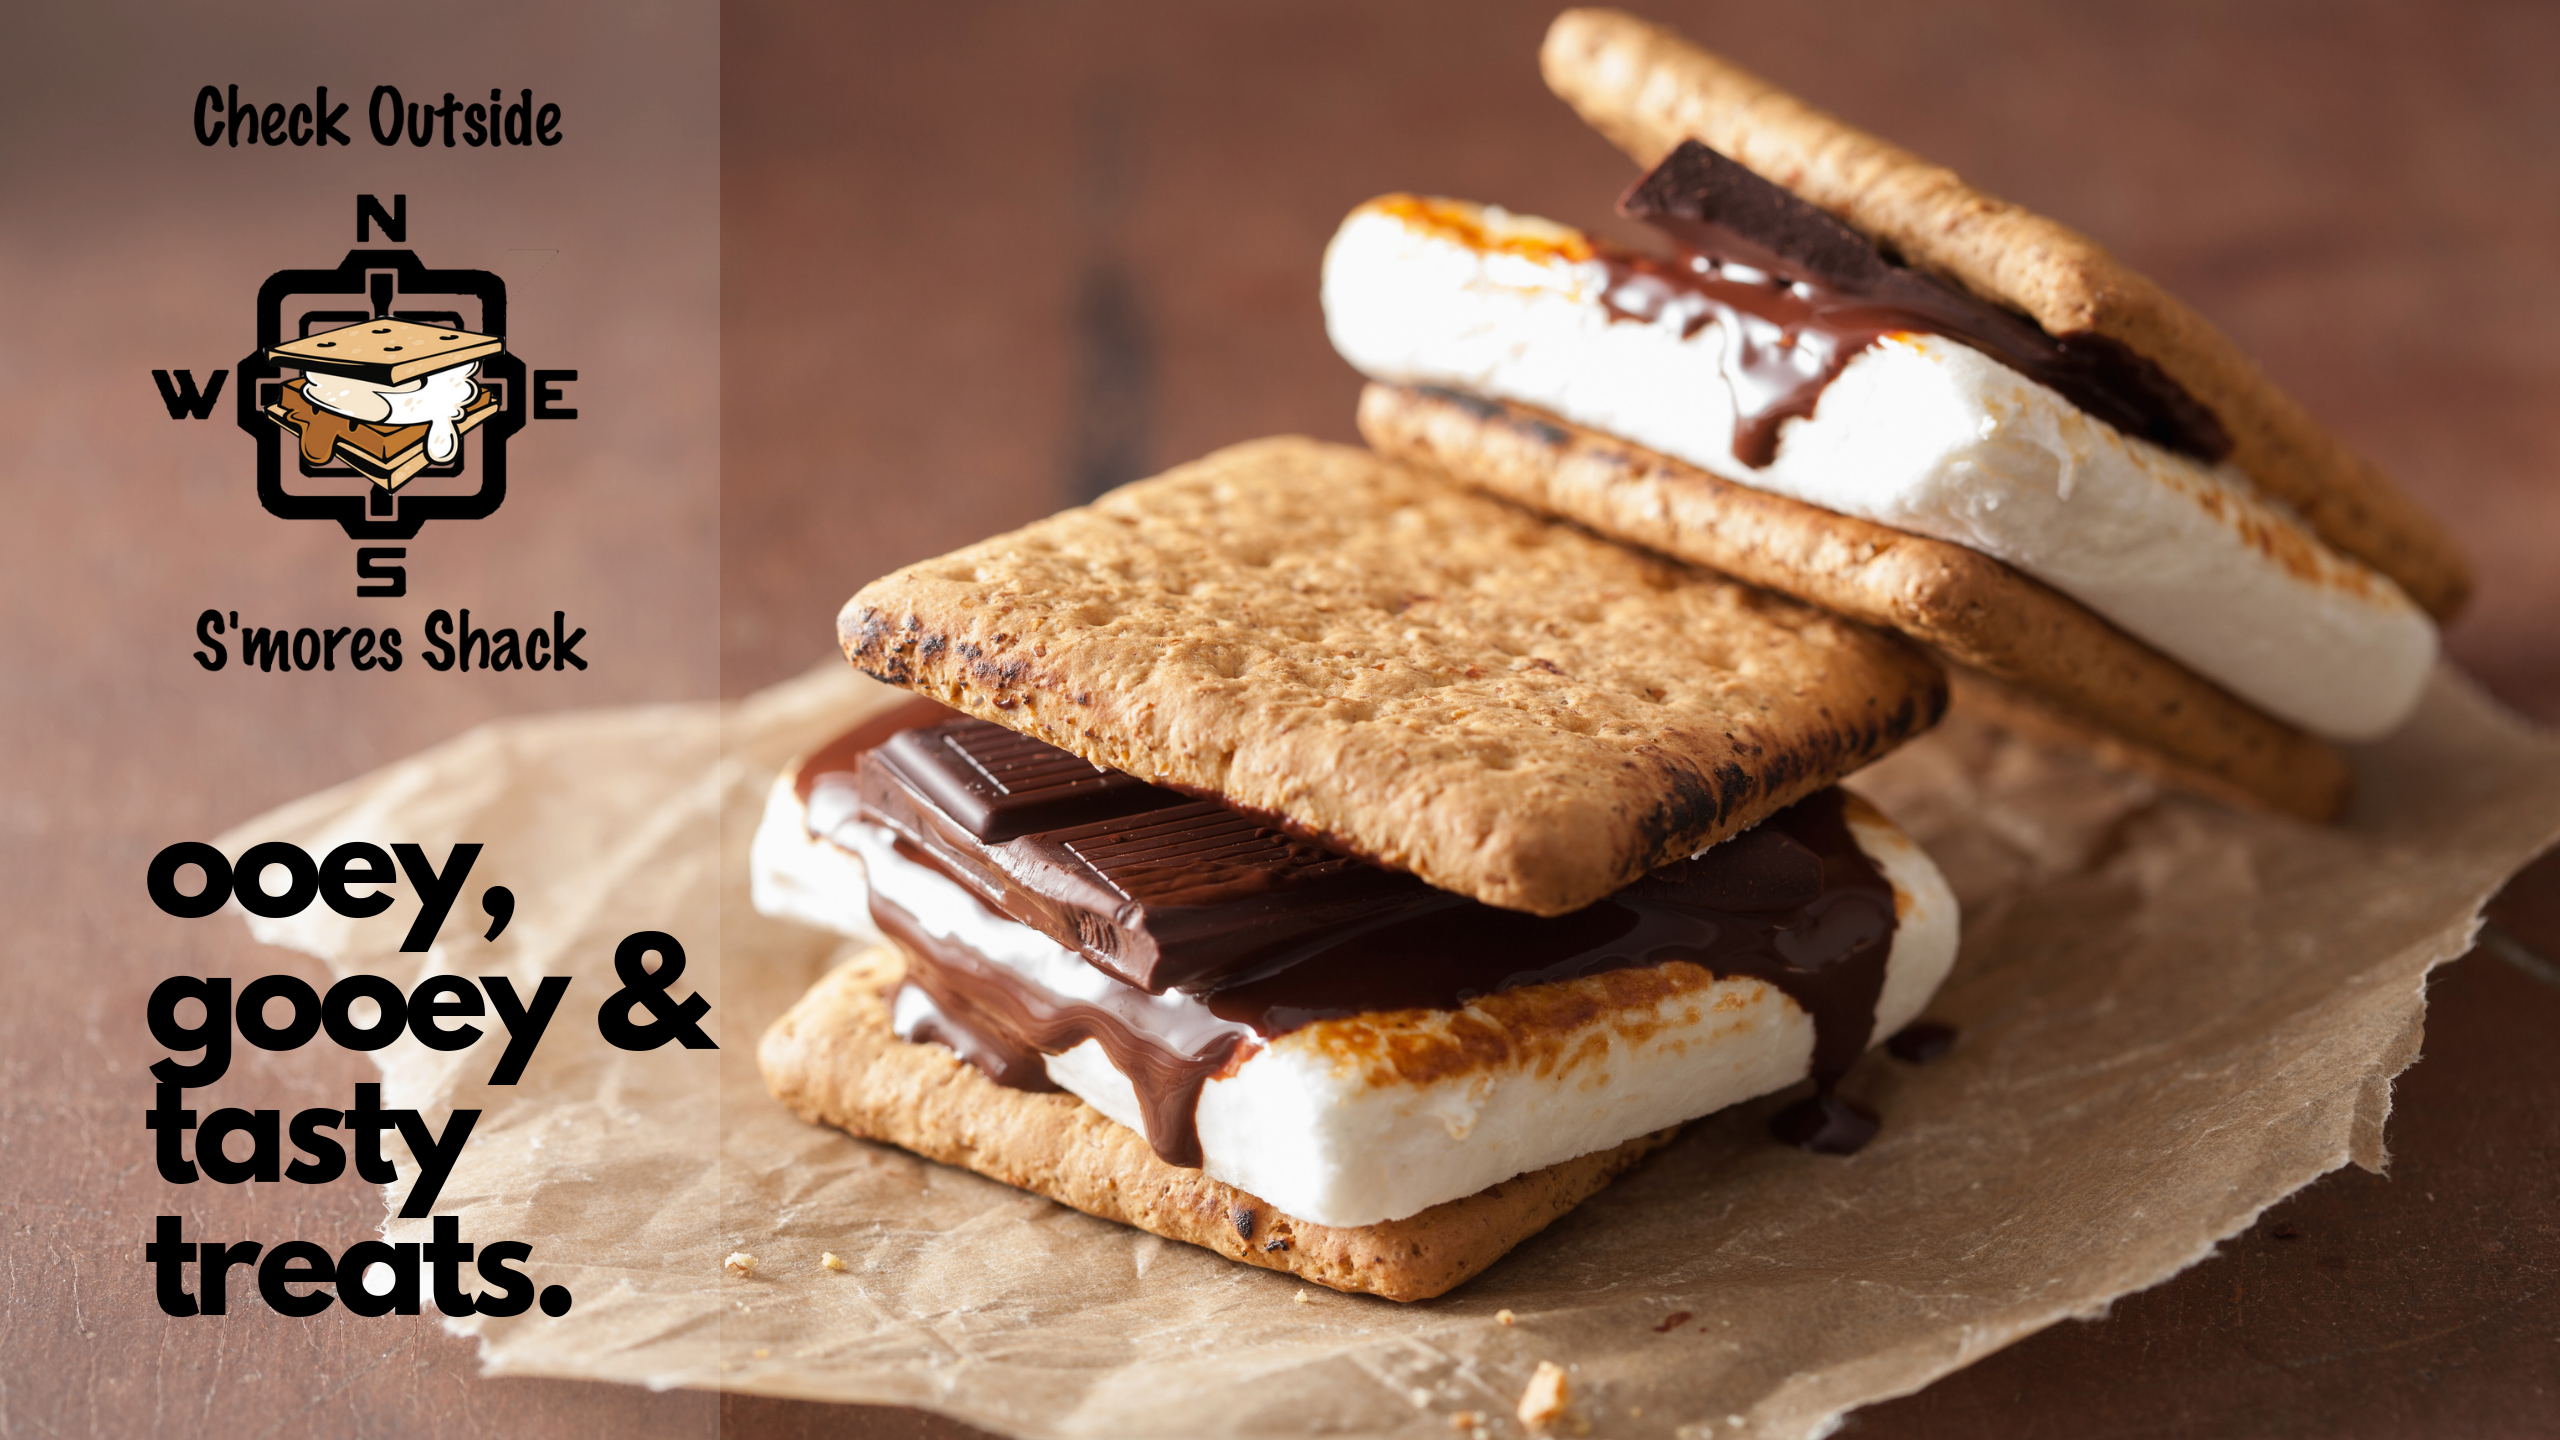 Country Jam 2019 Smores Chack Check Outside Promotion